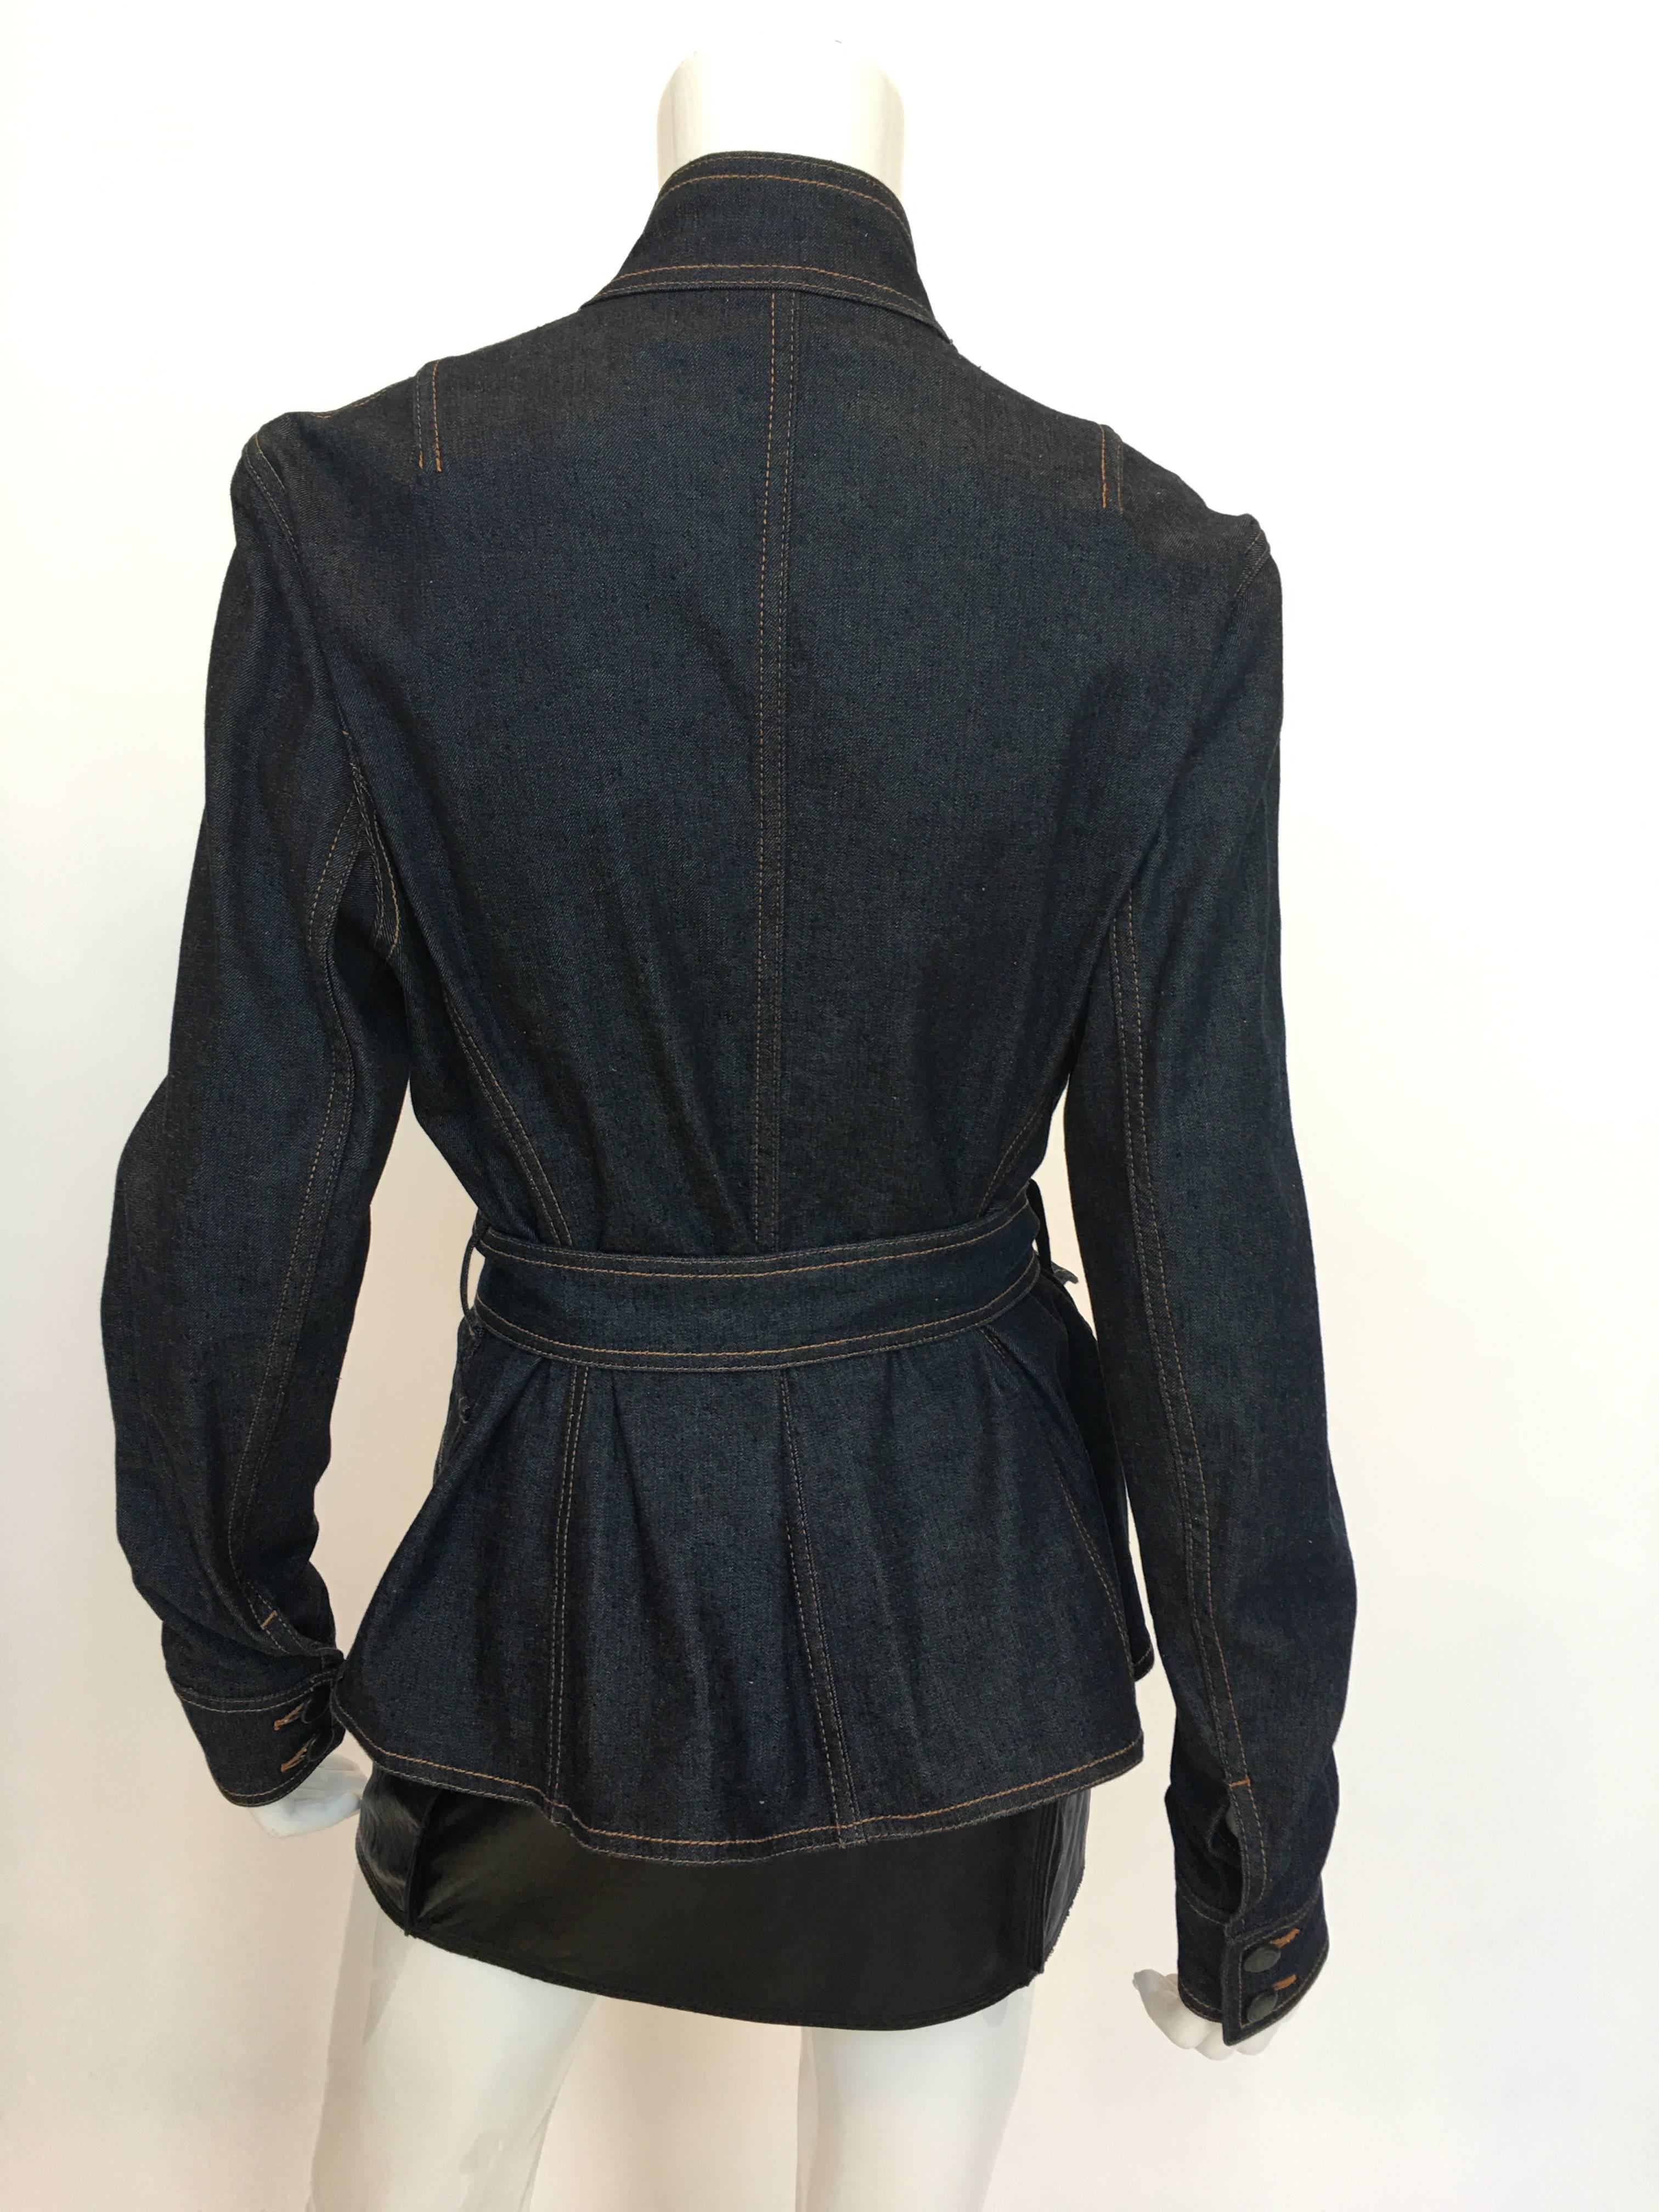 Yves Saint Laurent Rive Gauche 1990'S Denim Jacket. Double breasted with mandarin collar, 2 front patch pockets and belted. 98% cotton , 2% spandex

*ALL MEASUREMENTS TAKEN FLAT*

Shoulder to shoulder: 17